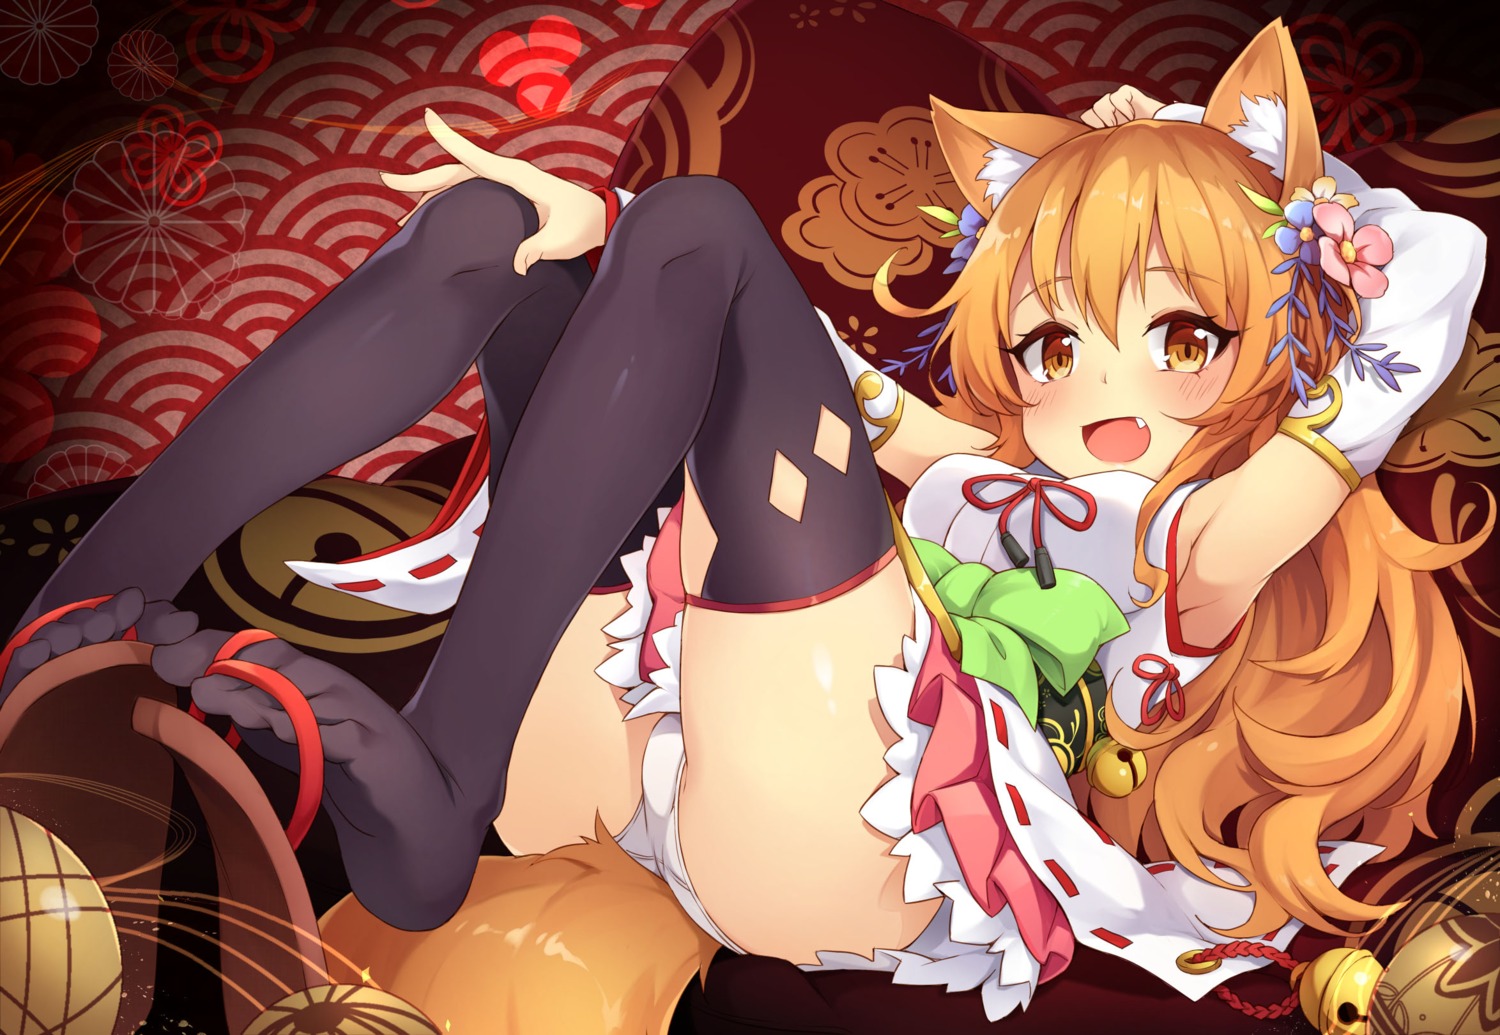 3.14 animal_ears feet japanese_clothes pantsu shironeko_project tail thighhighs